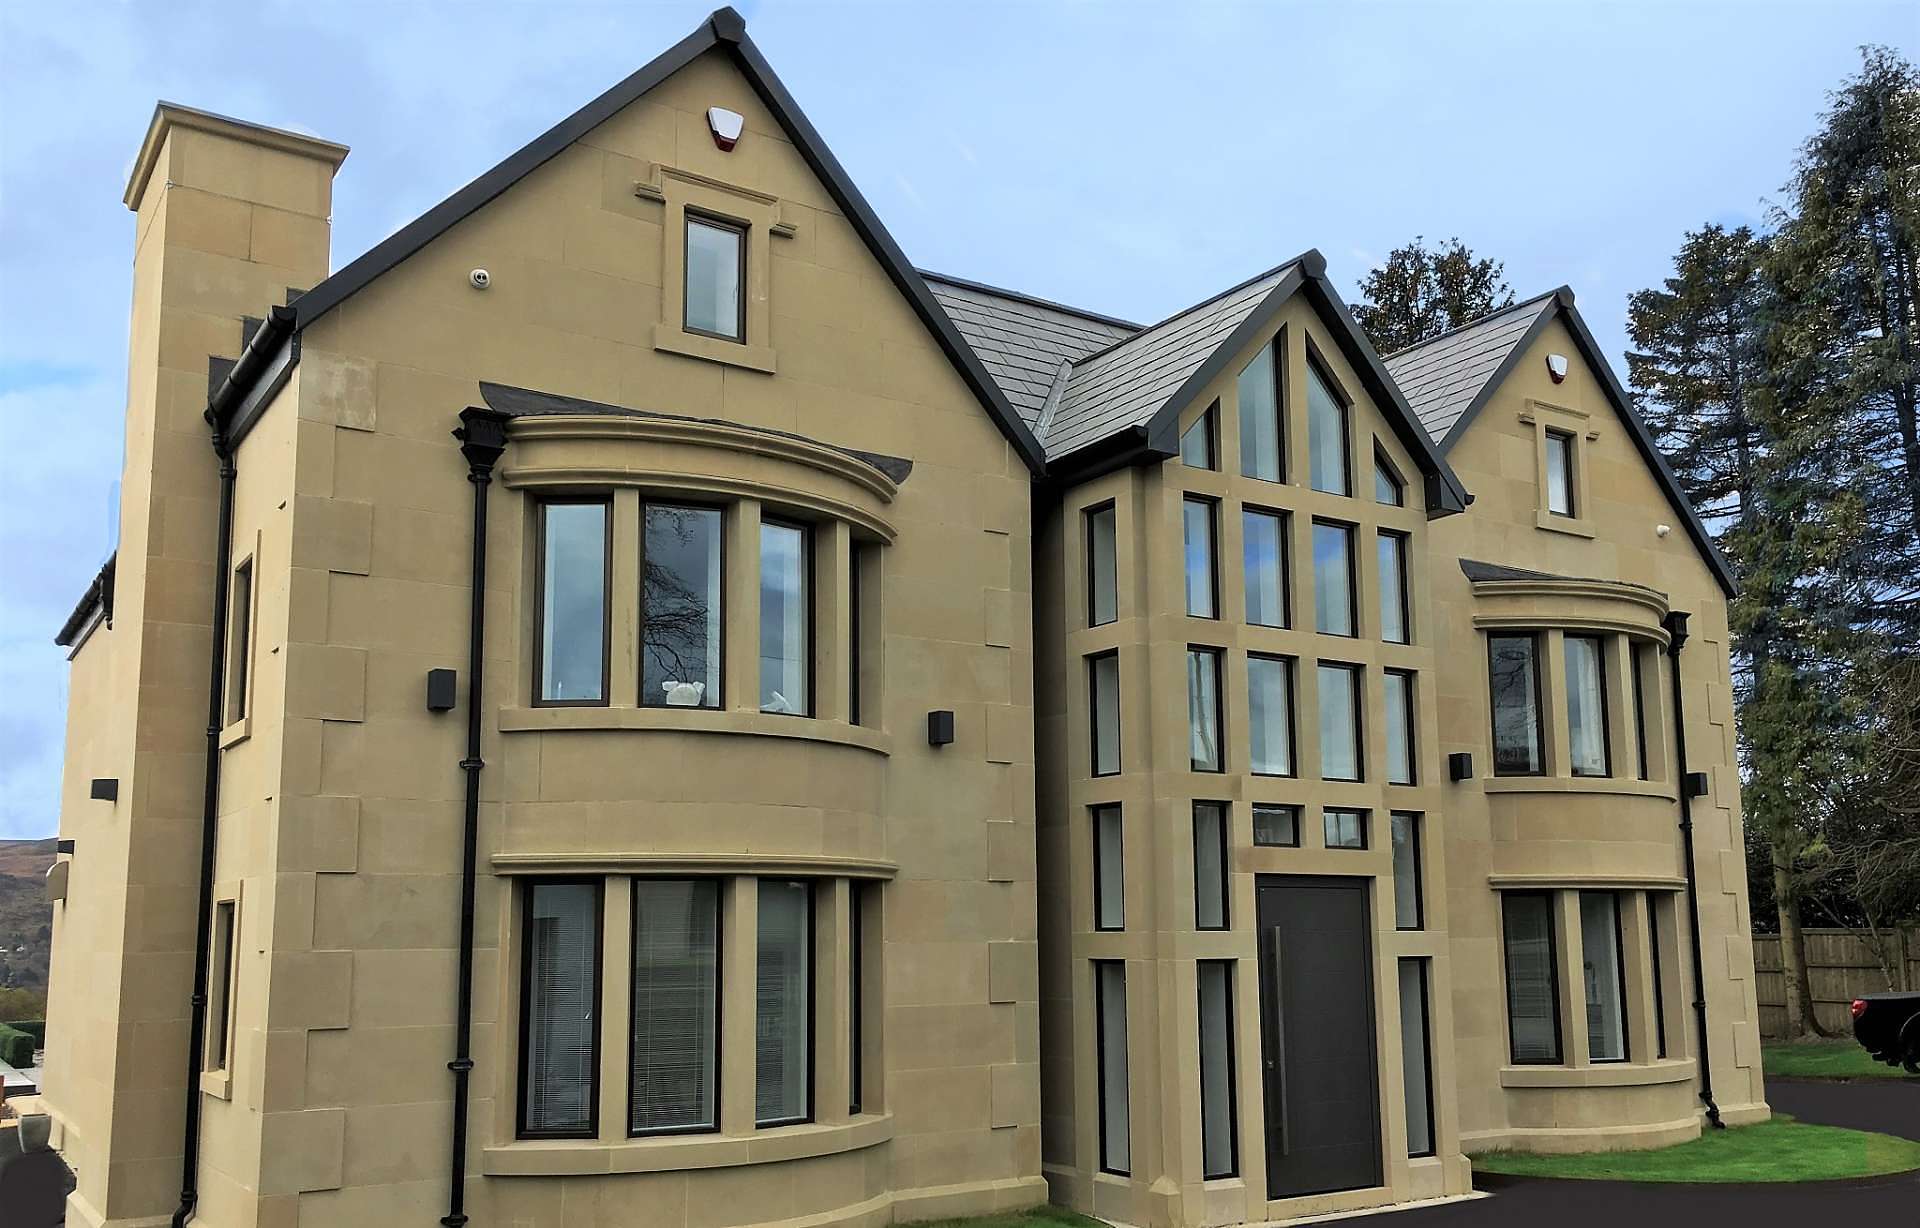 Modern aluminium windows installed at new build property in Ilkley in Yorkshire